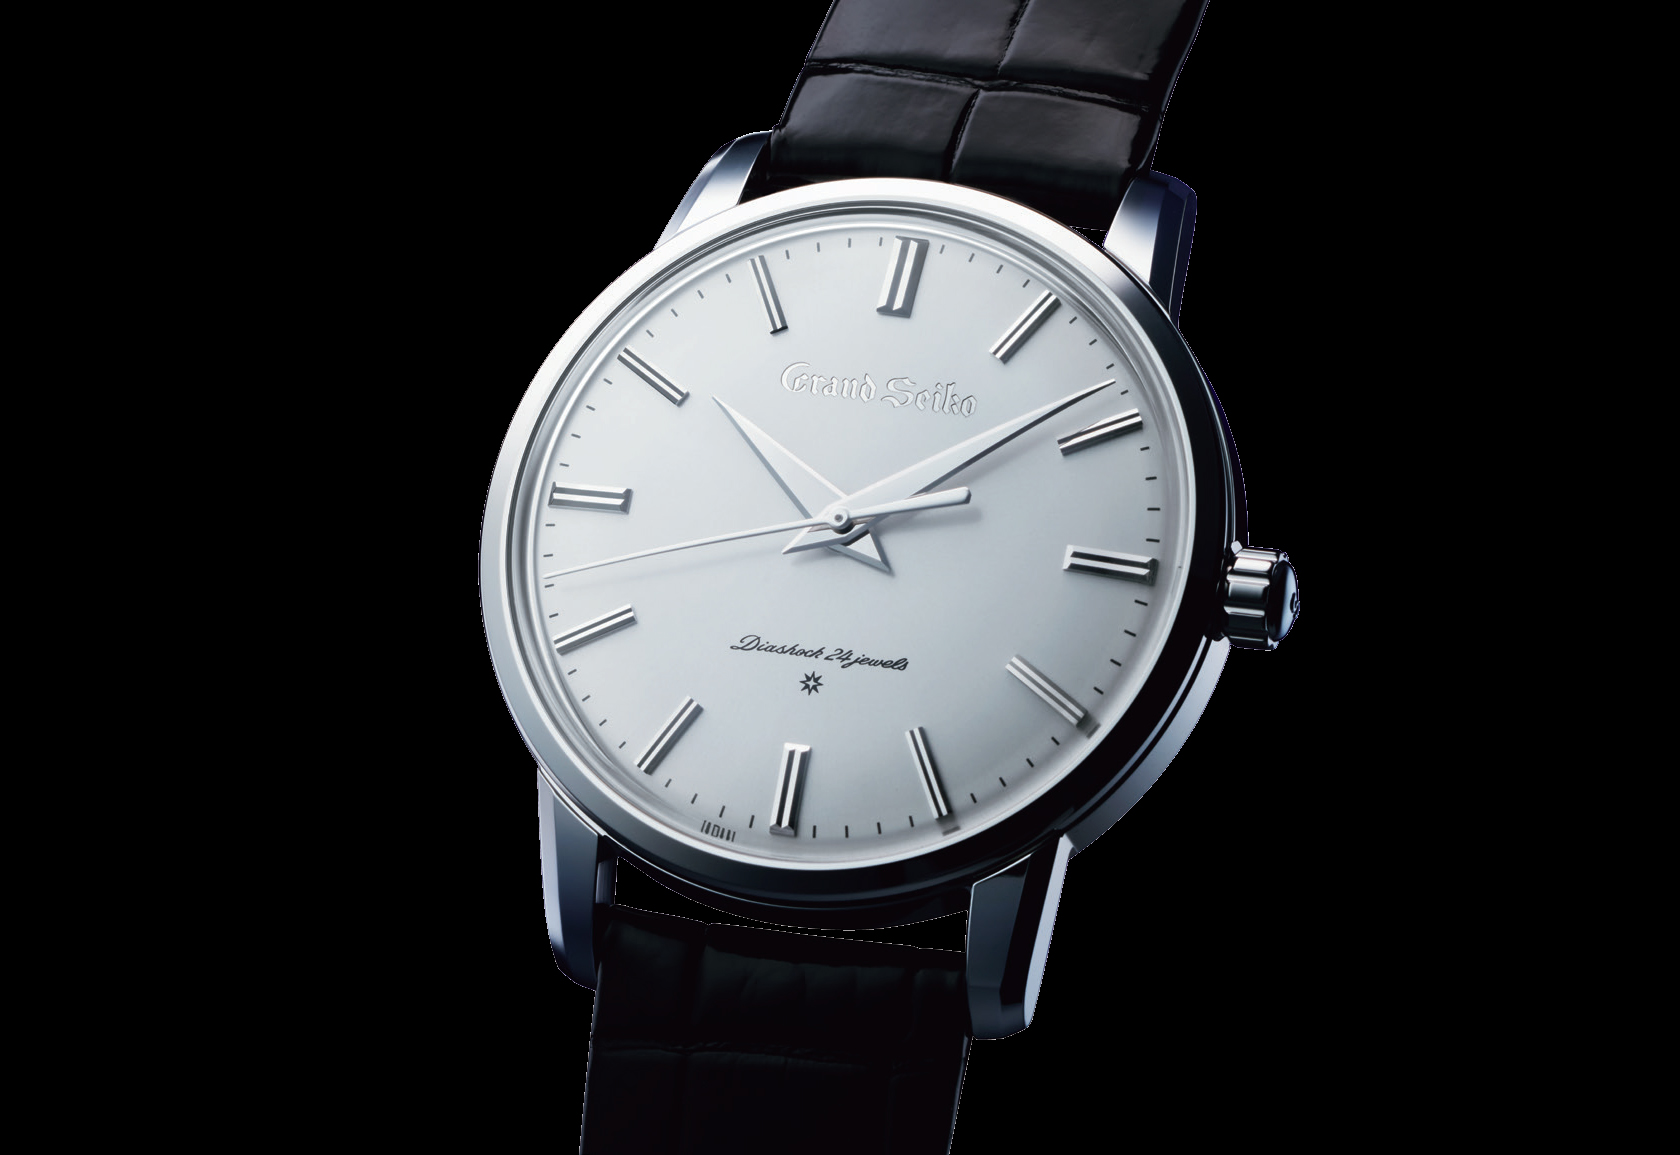 Grand Seiko looks to the future with modern take on first watch